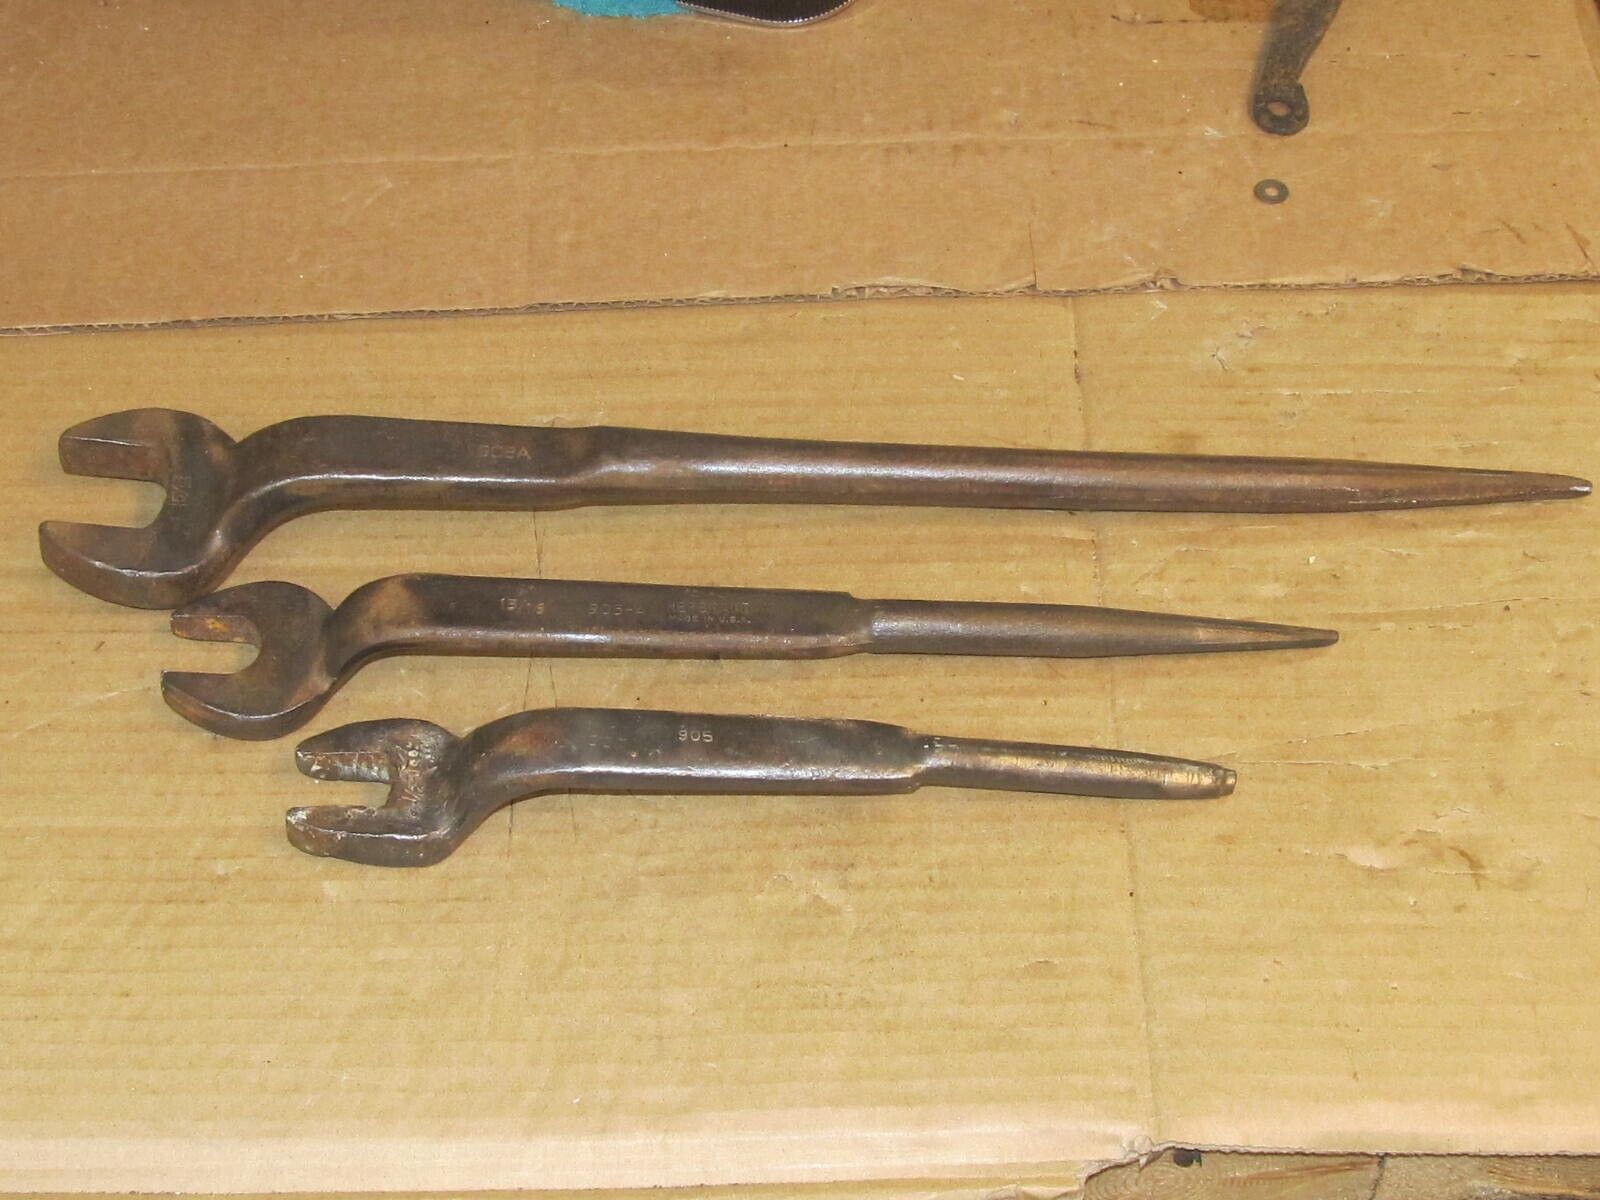 Lot of 3 Vintage  Herbrand Spud Wrenches 905 A, 908A, & 905